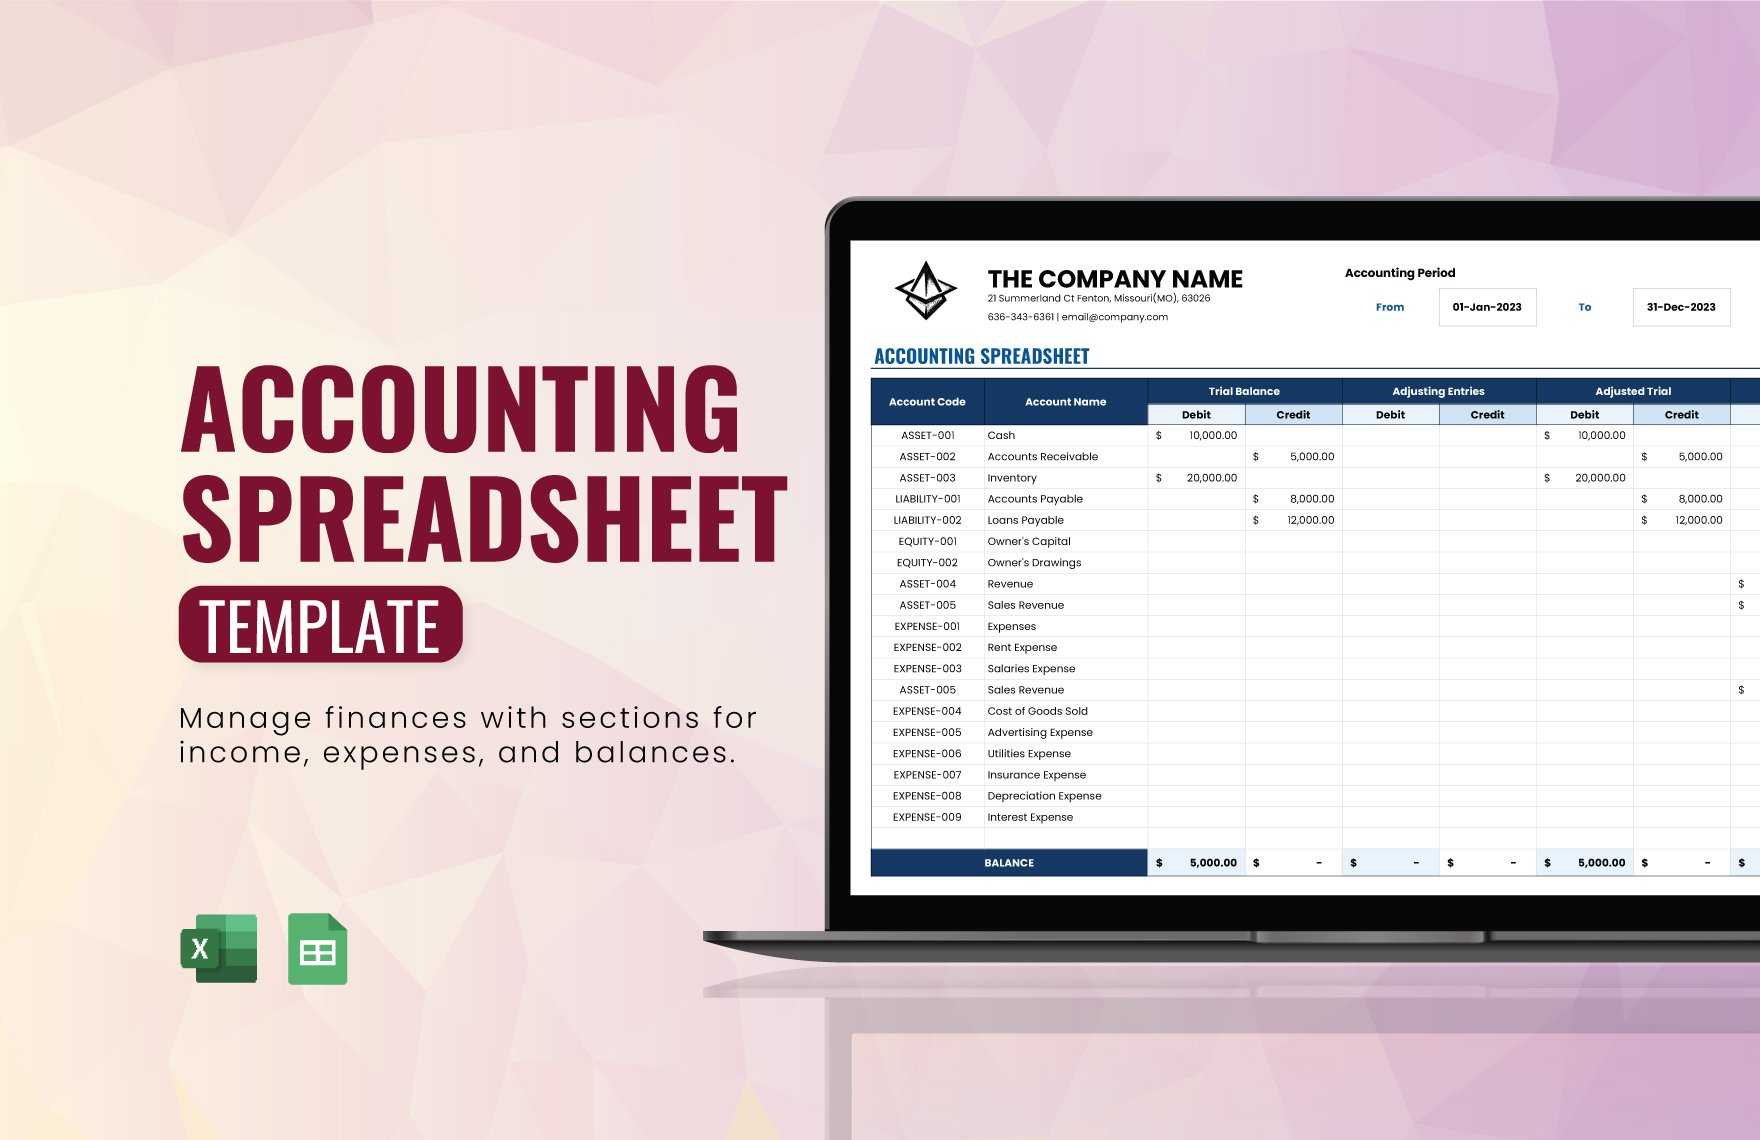 Free Accounting Spreadsheet Template in Excel, Google Sheets